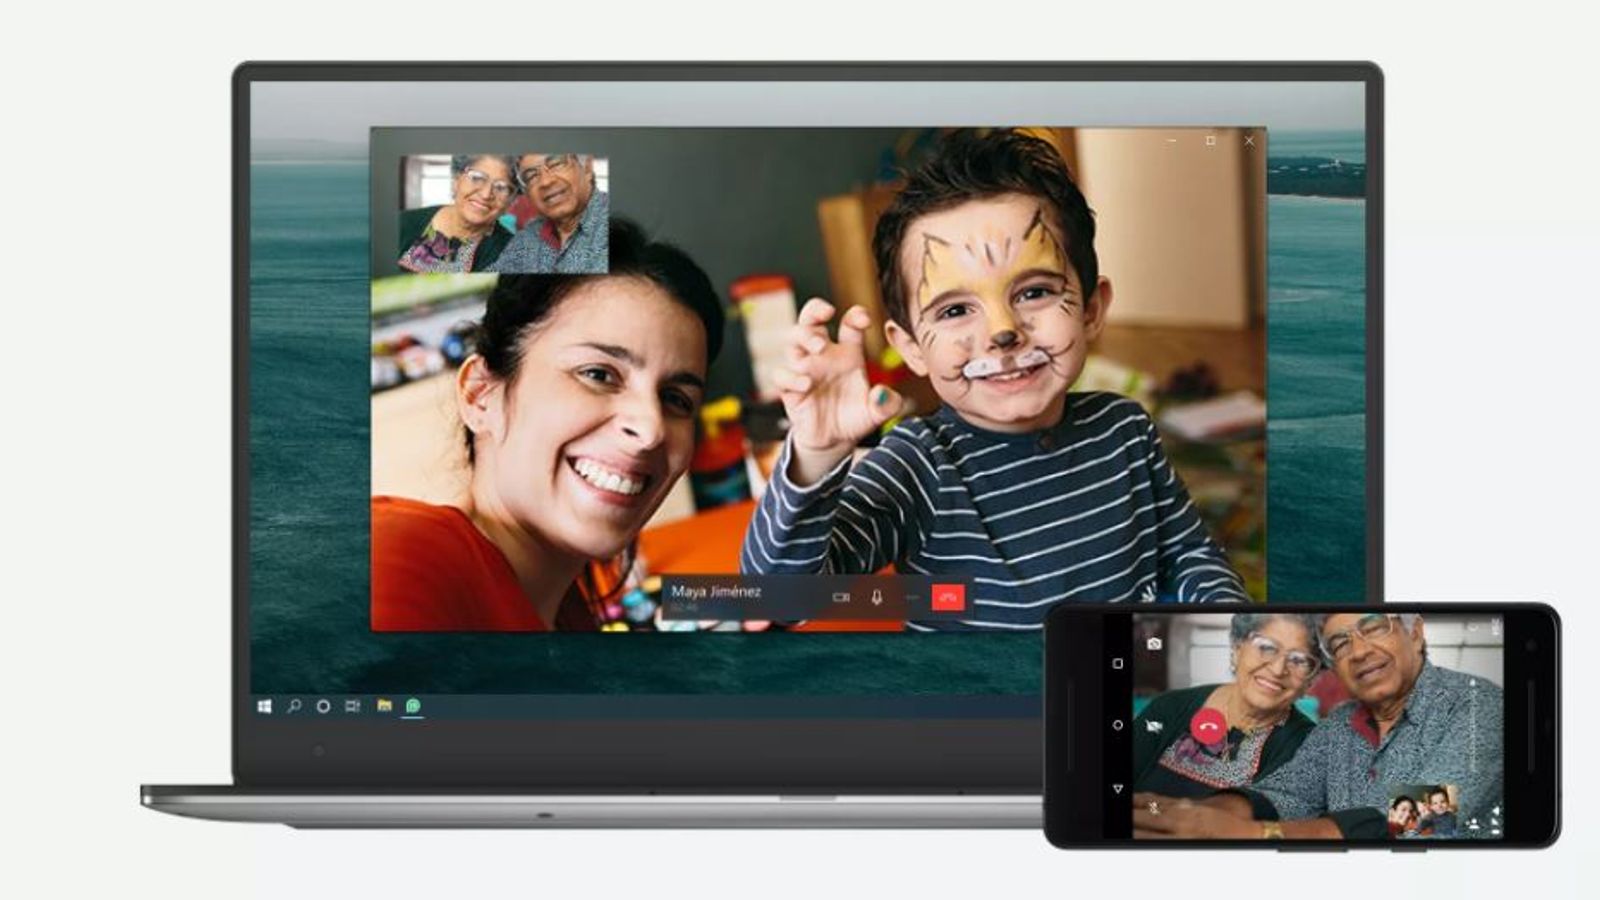 WhatsApp is reportedly adding video calls soon. – Your World Of